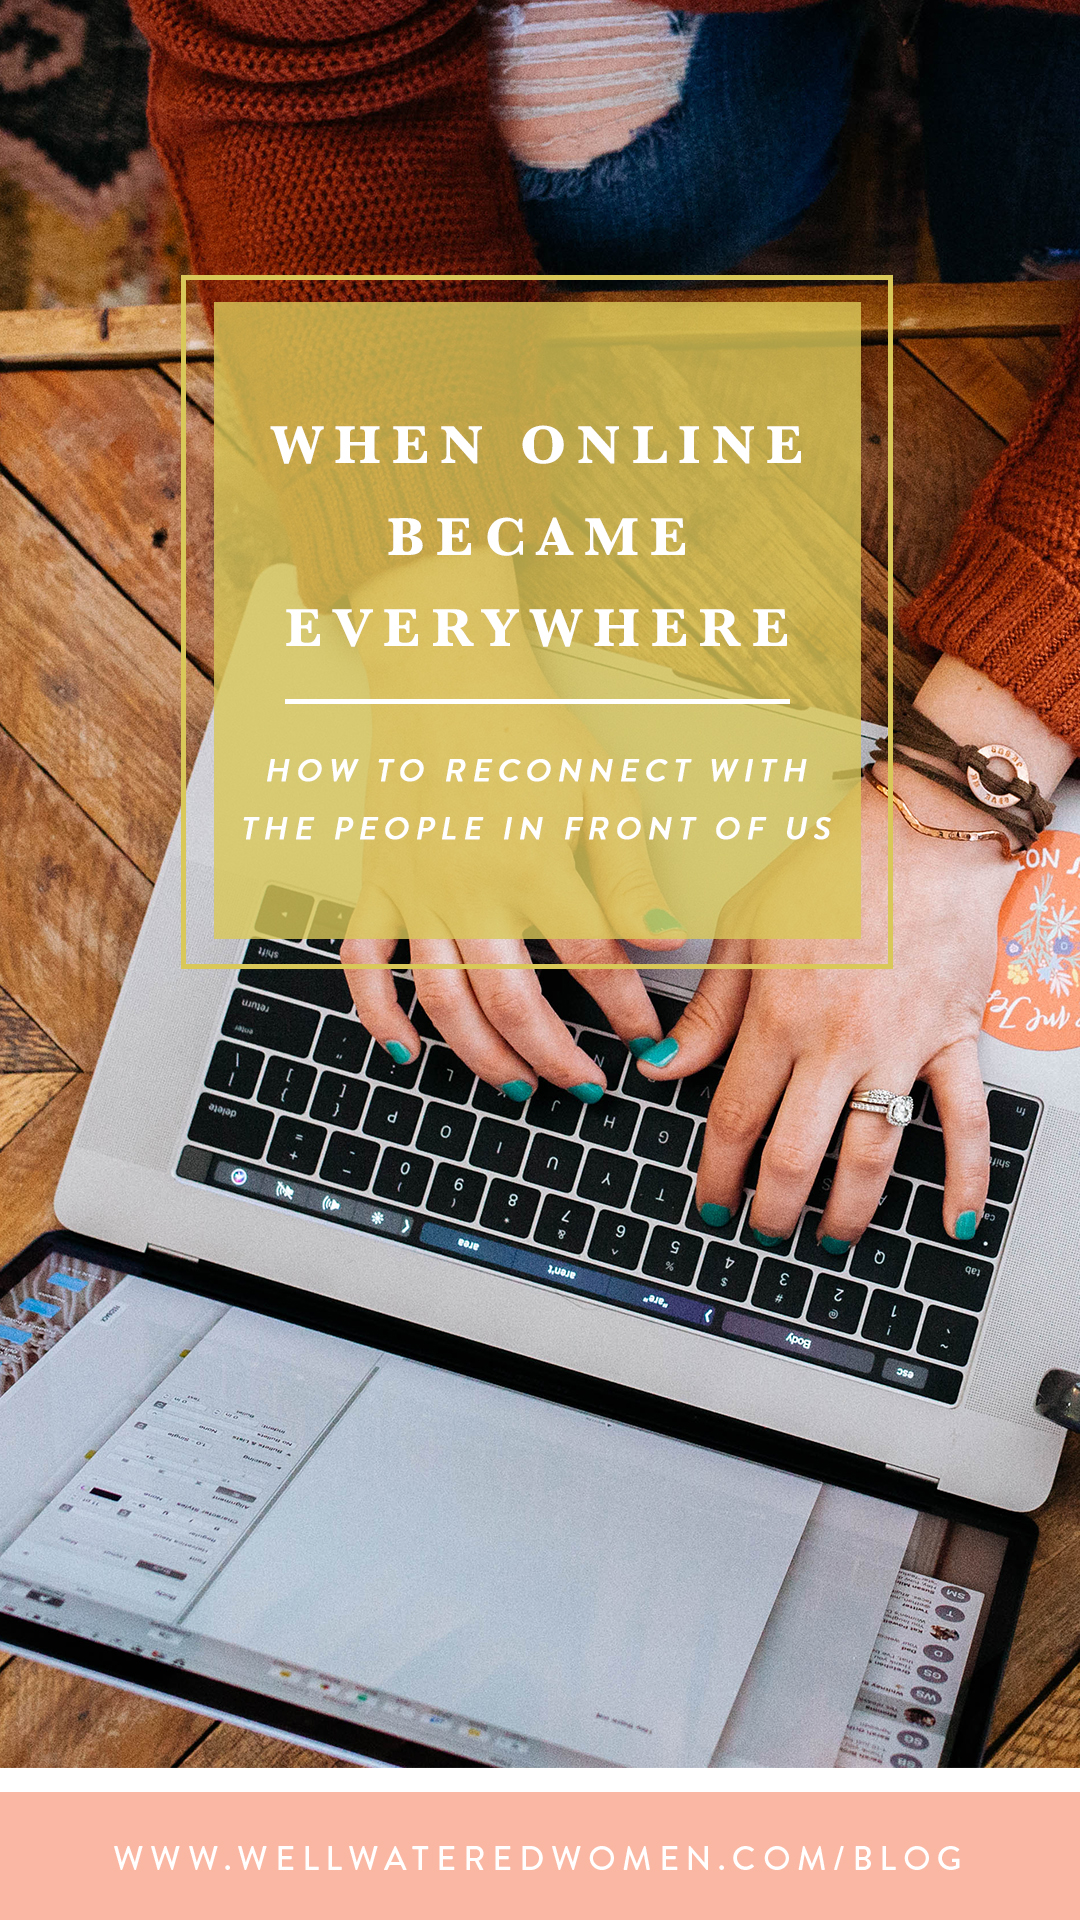 When Online Became Everywhere: How to put away the phoen and reconnect with the people around you!